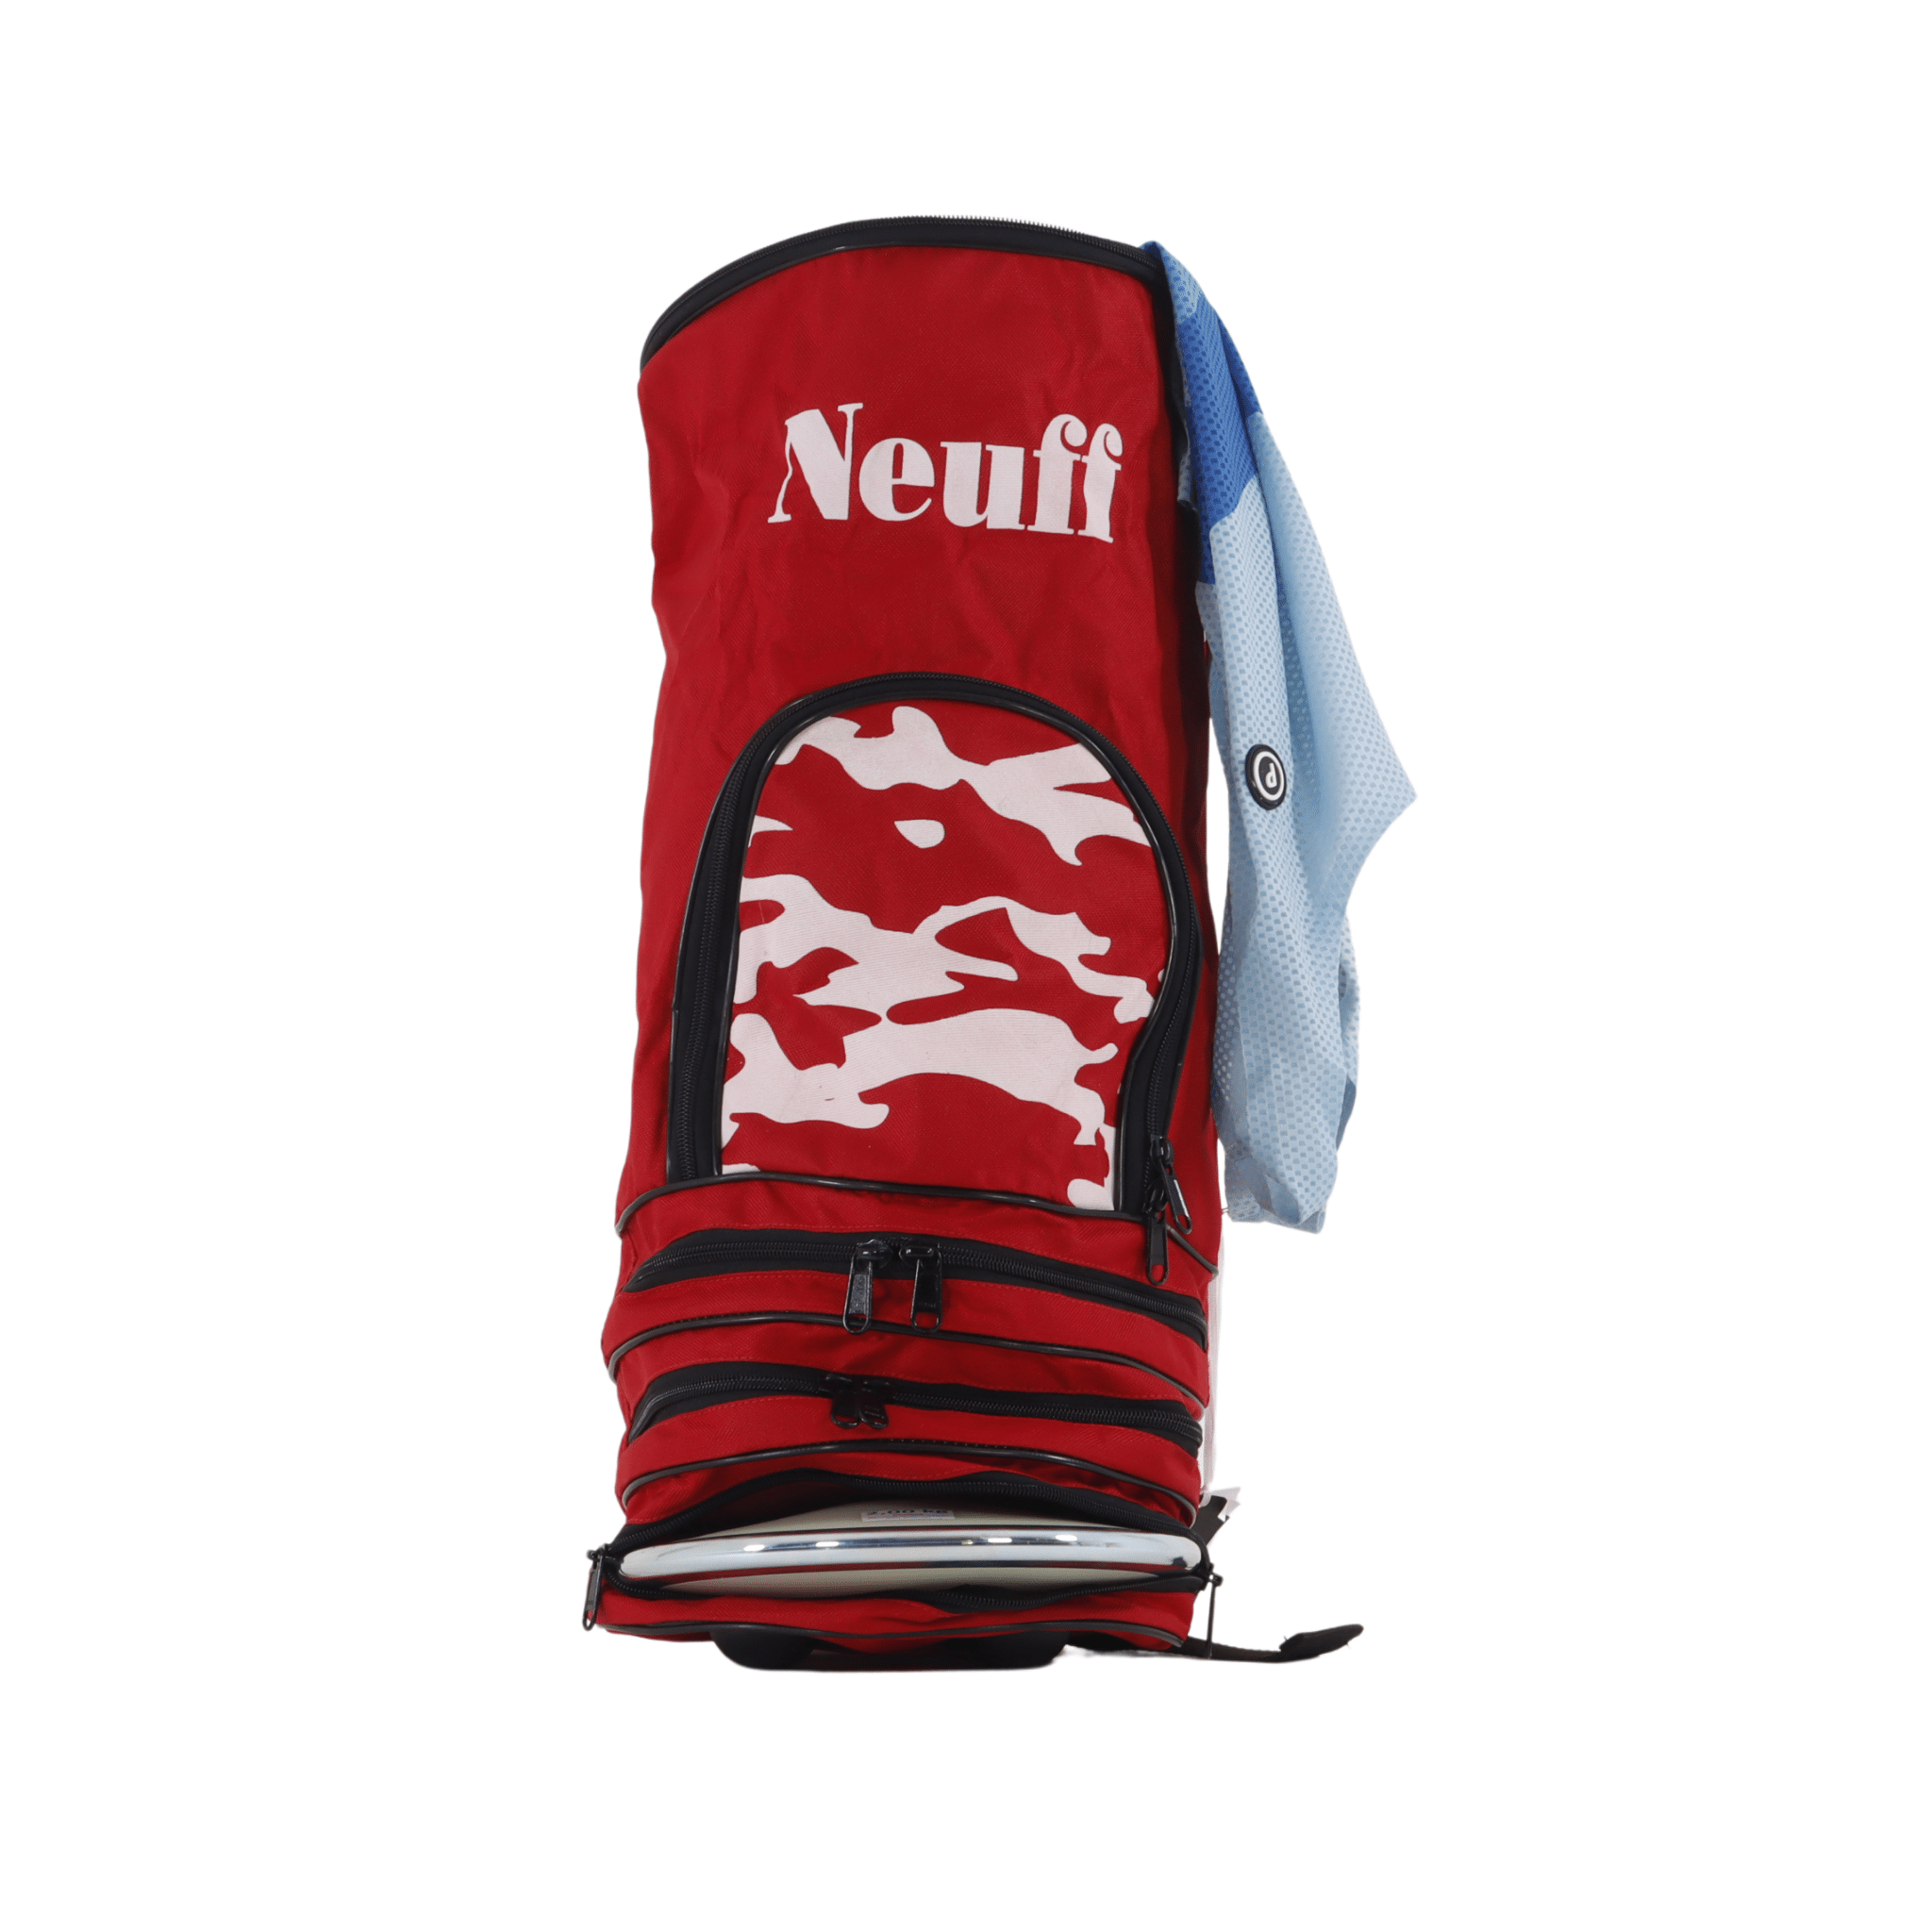 Nelco discus kit bag red to hold discus and kit